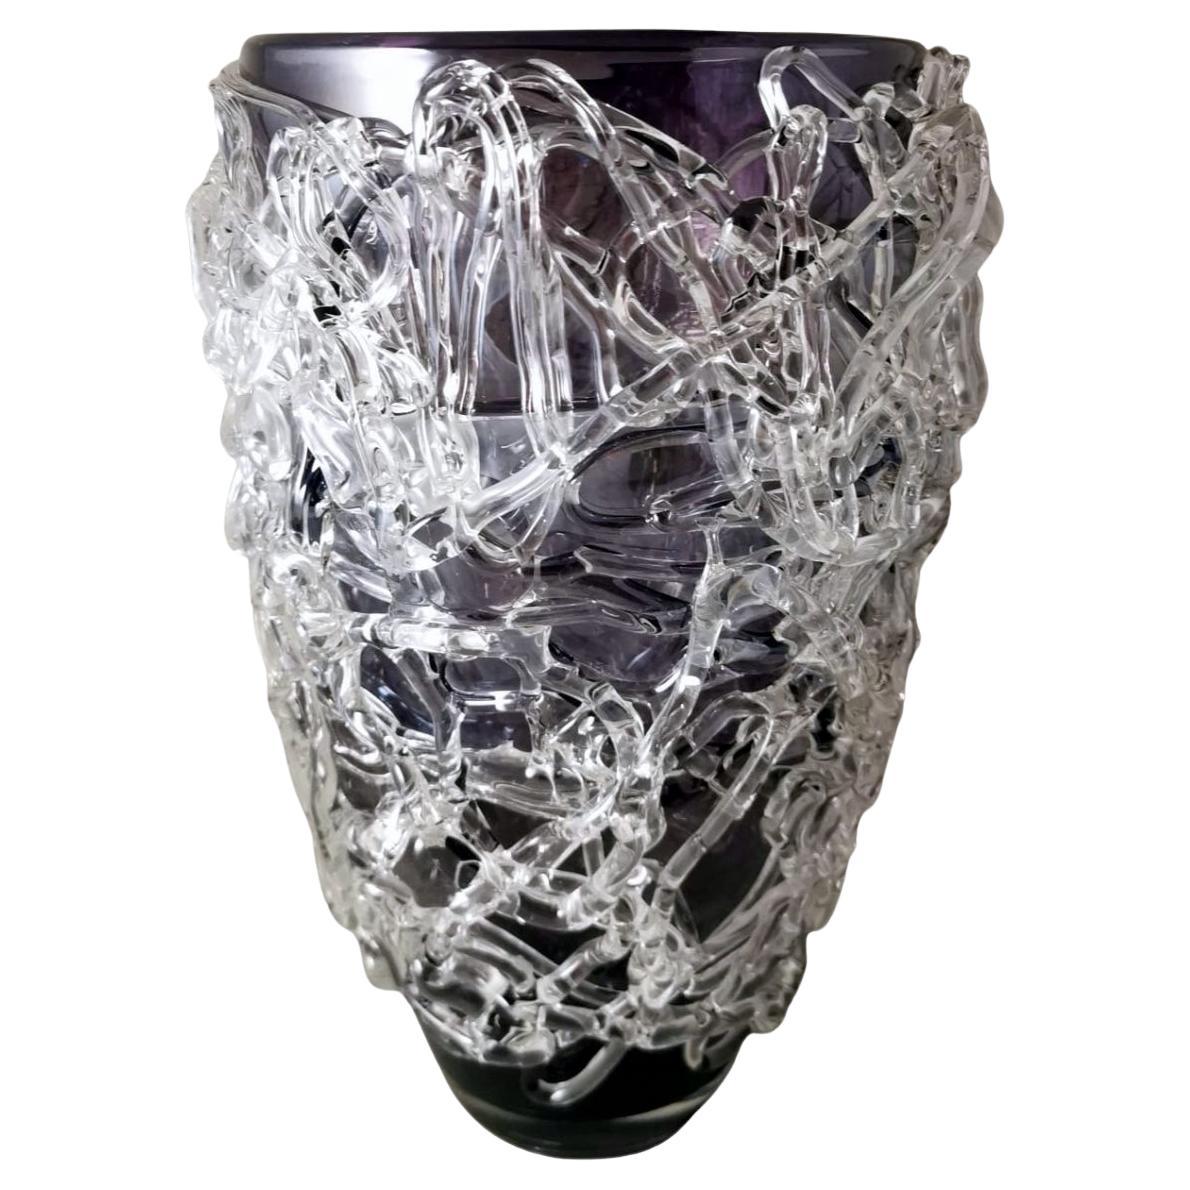 Murano Italian Vase With Glass Threads Applied In Bulk For Sale